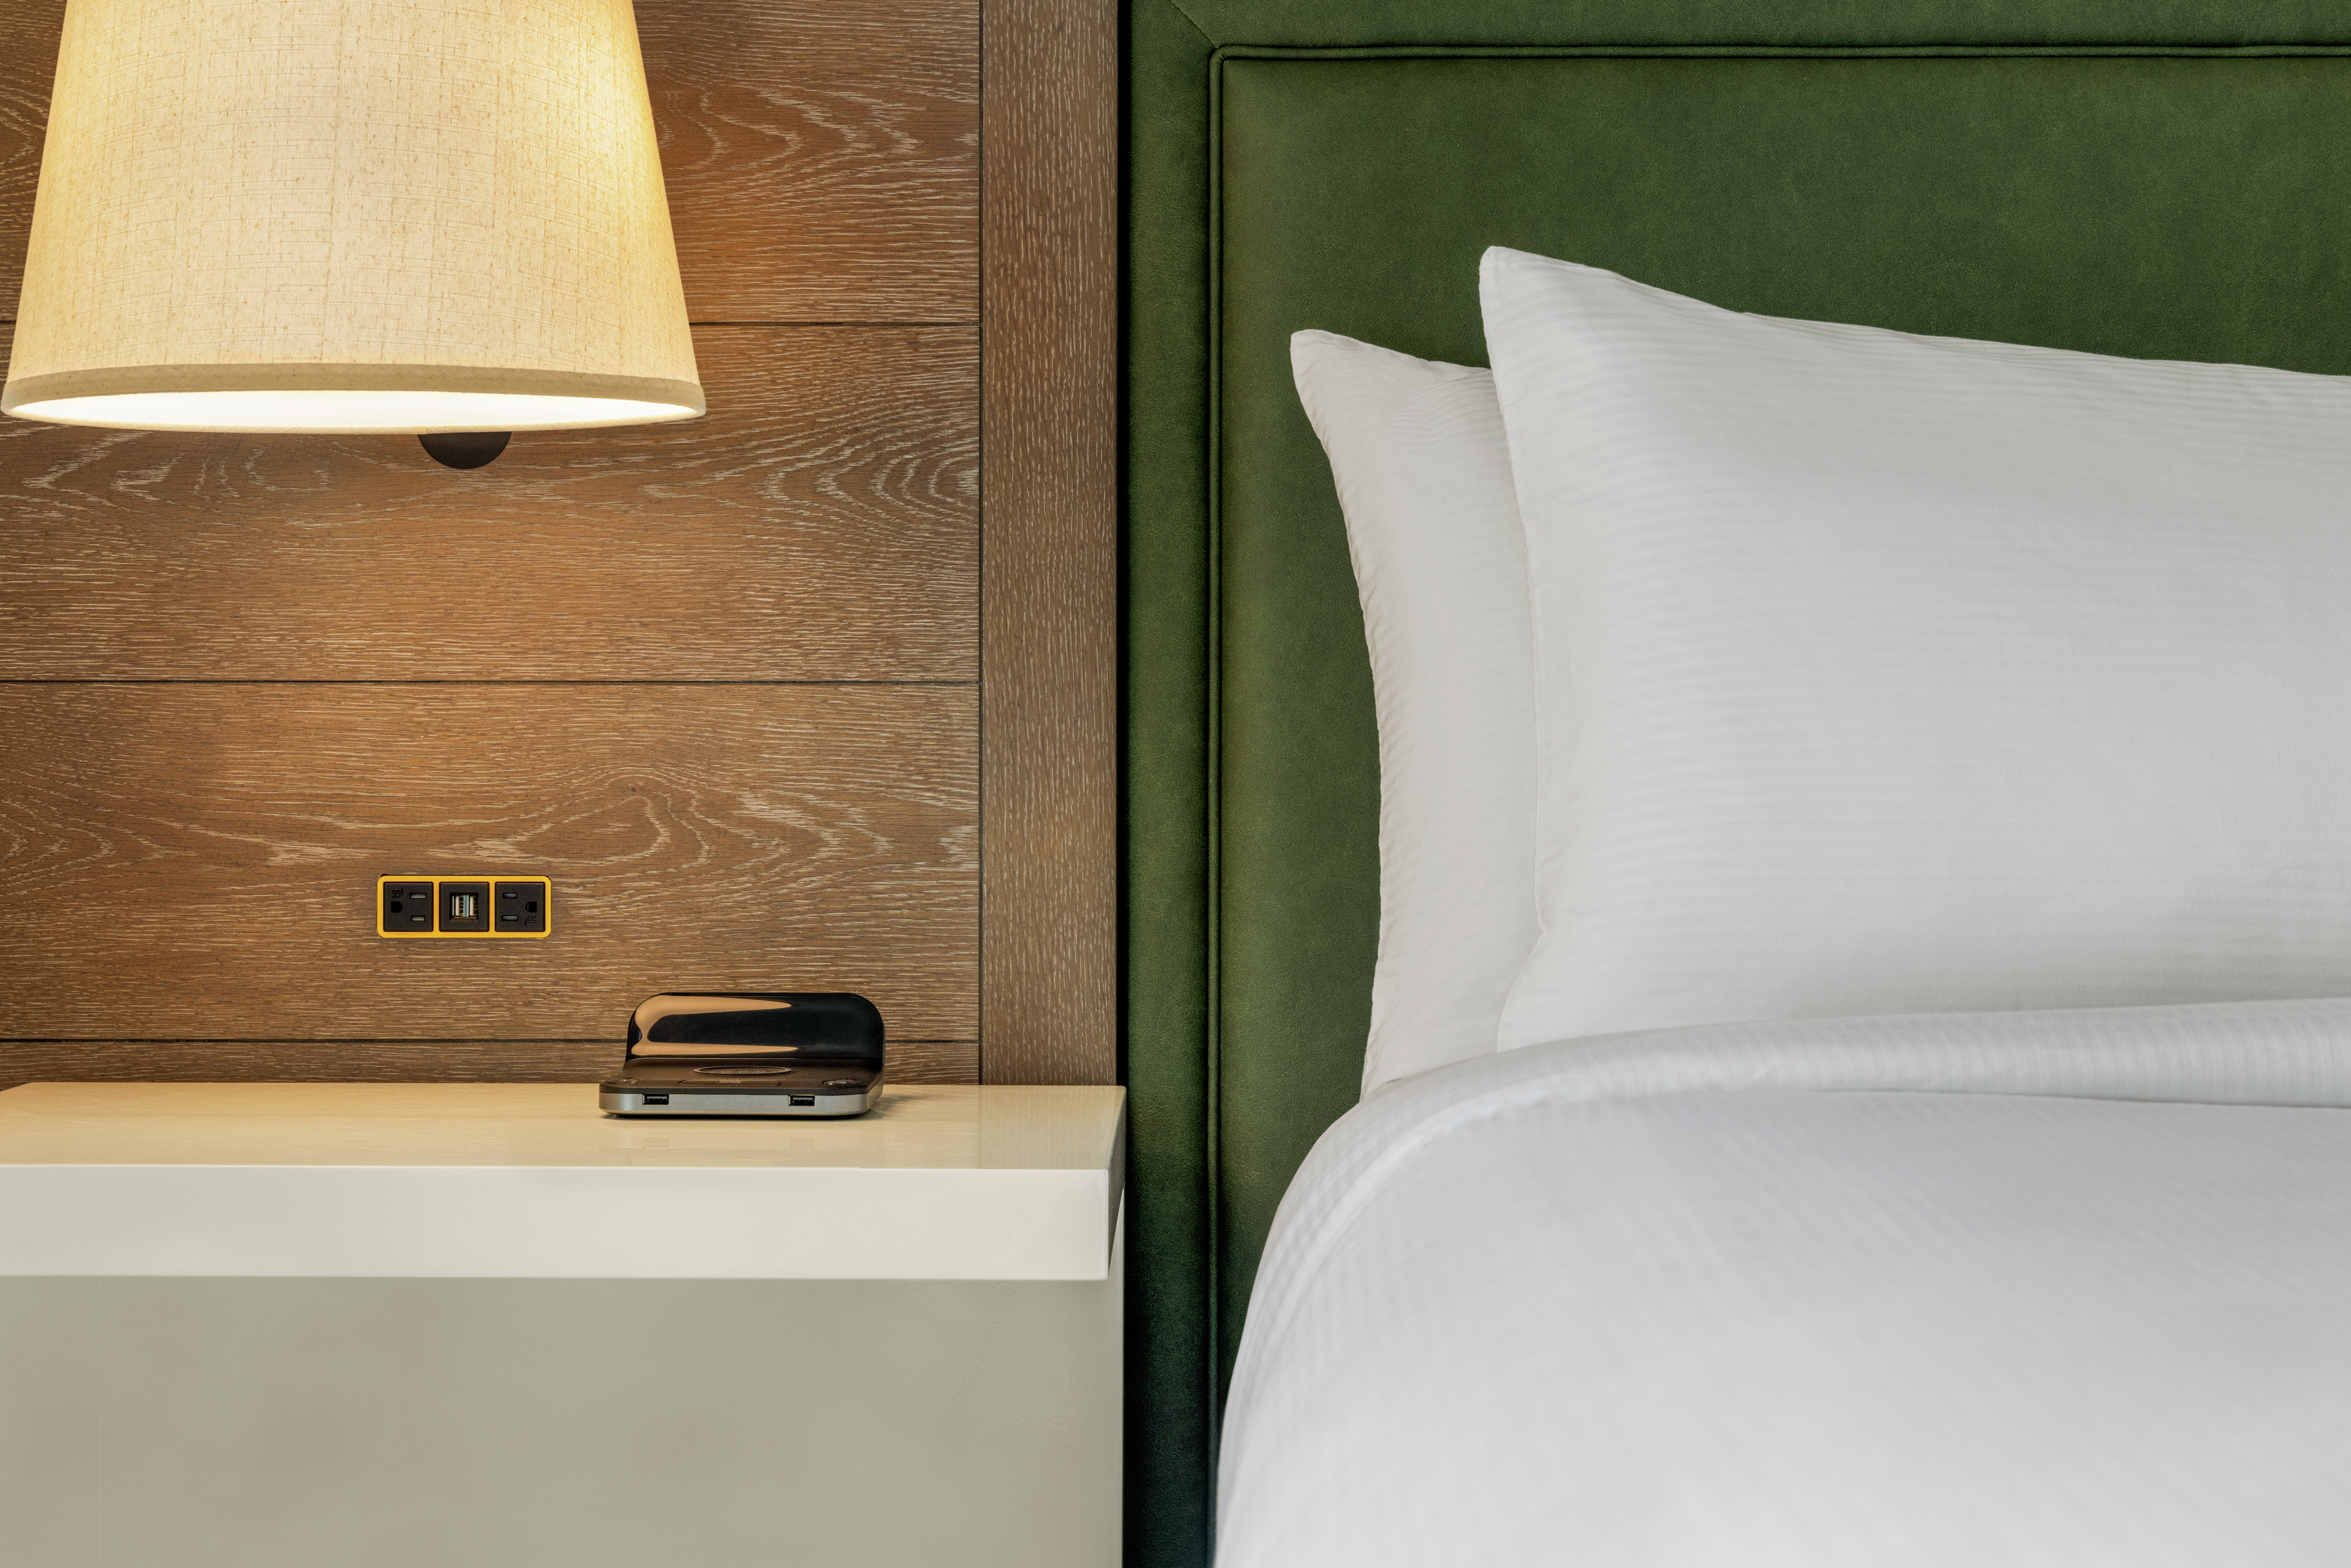 Close up of plush bedding and bedside table featuring USB ports and wireless phone charger